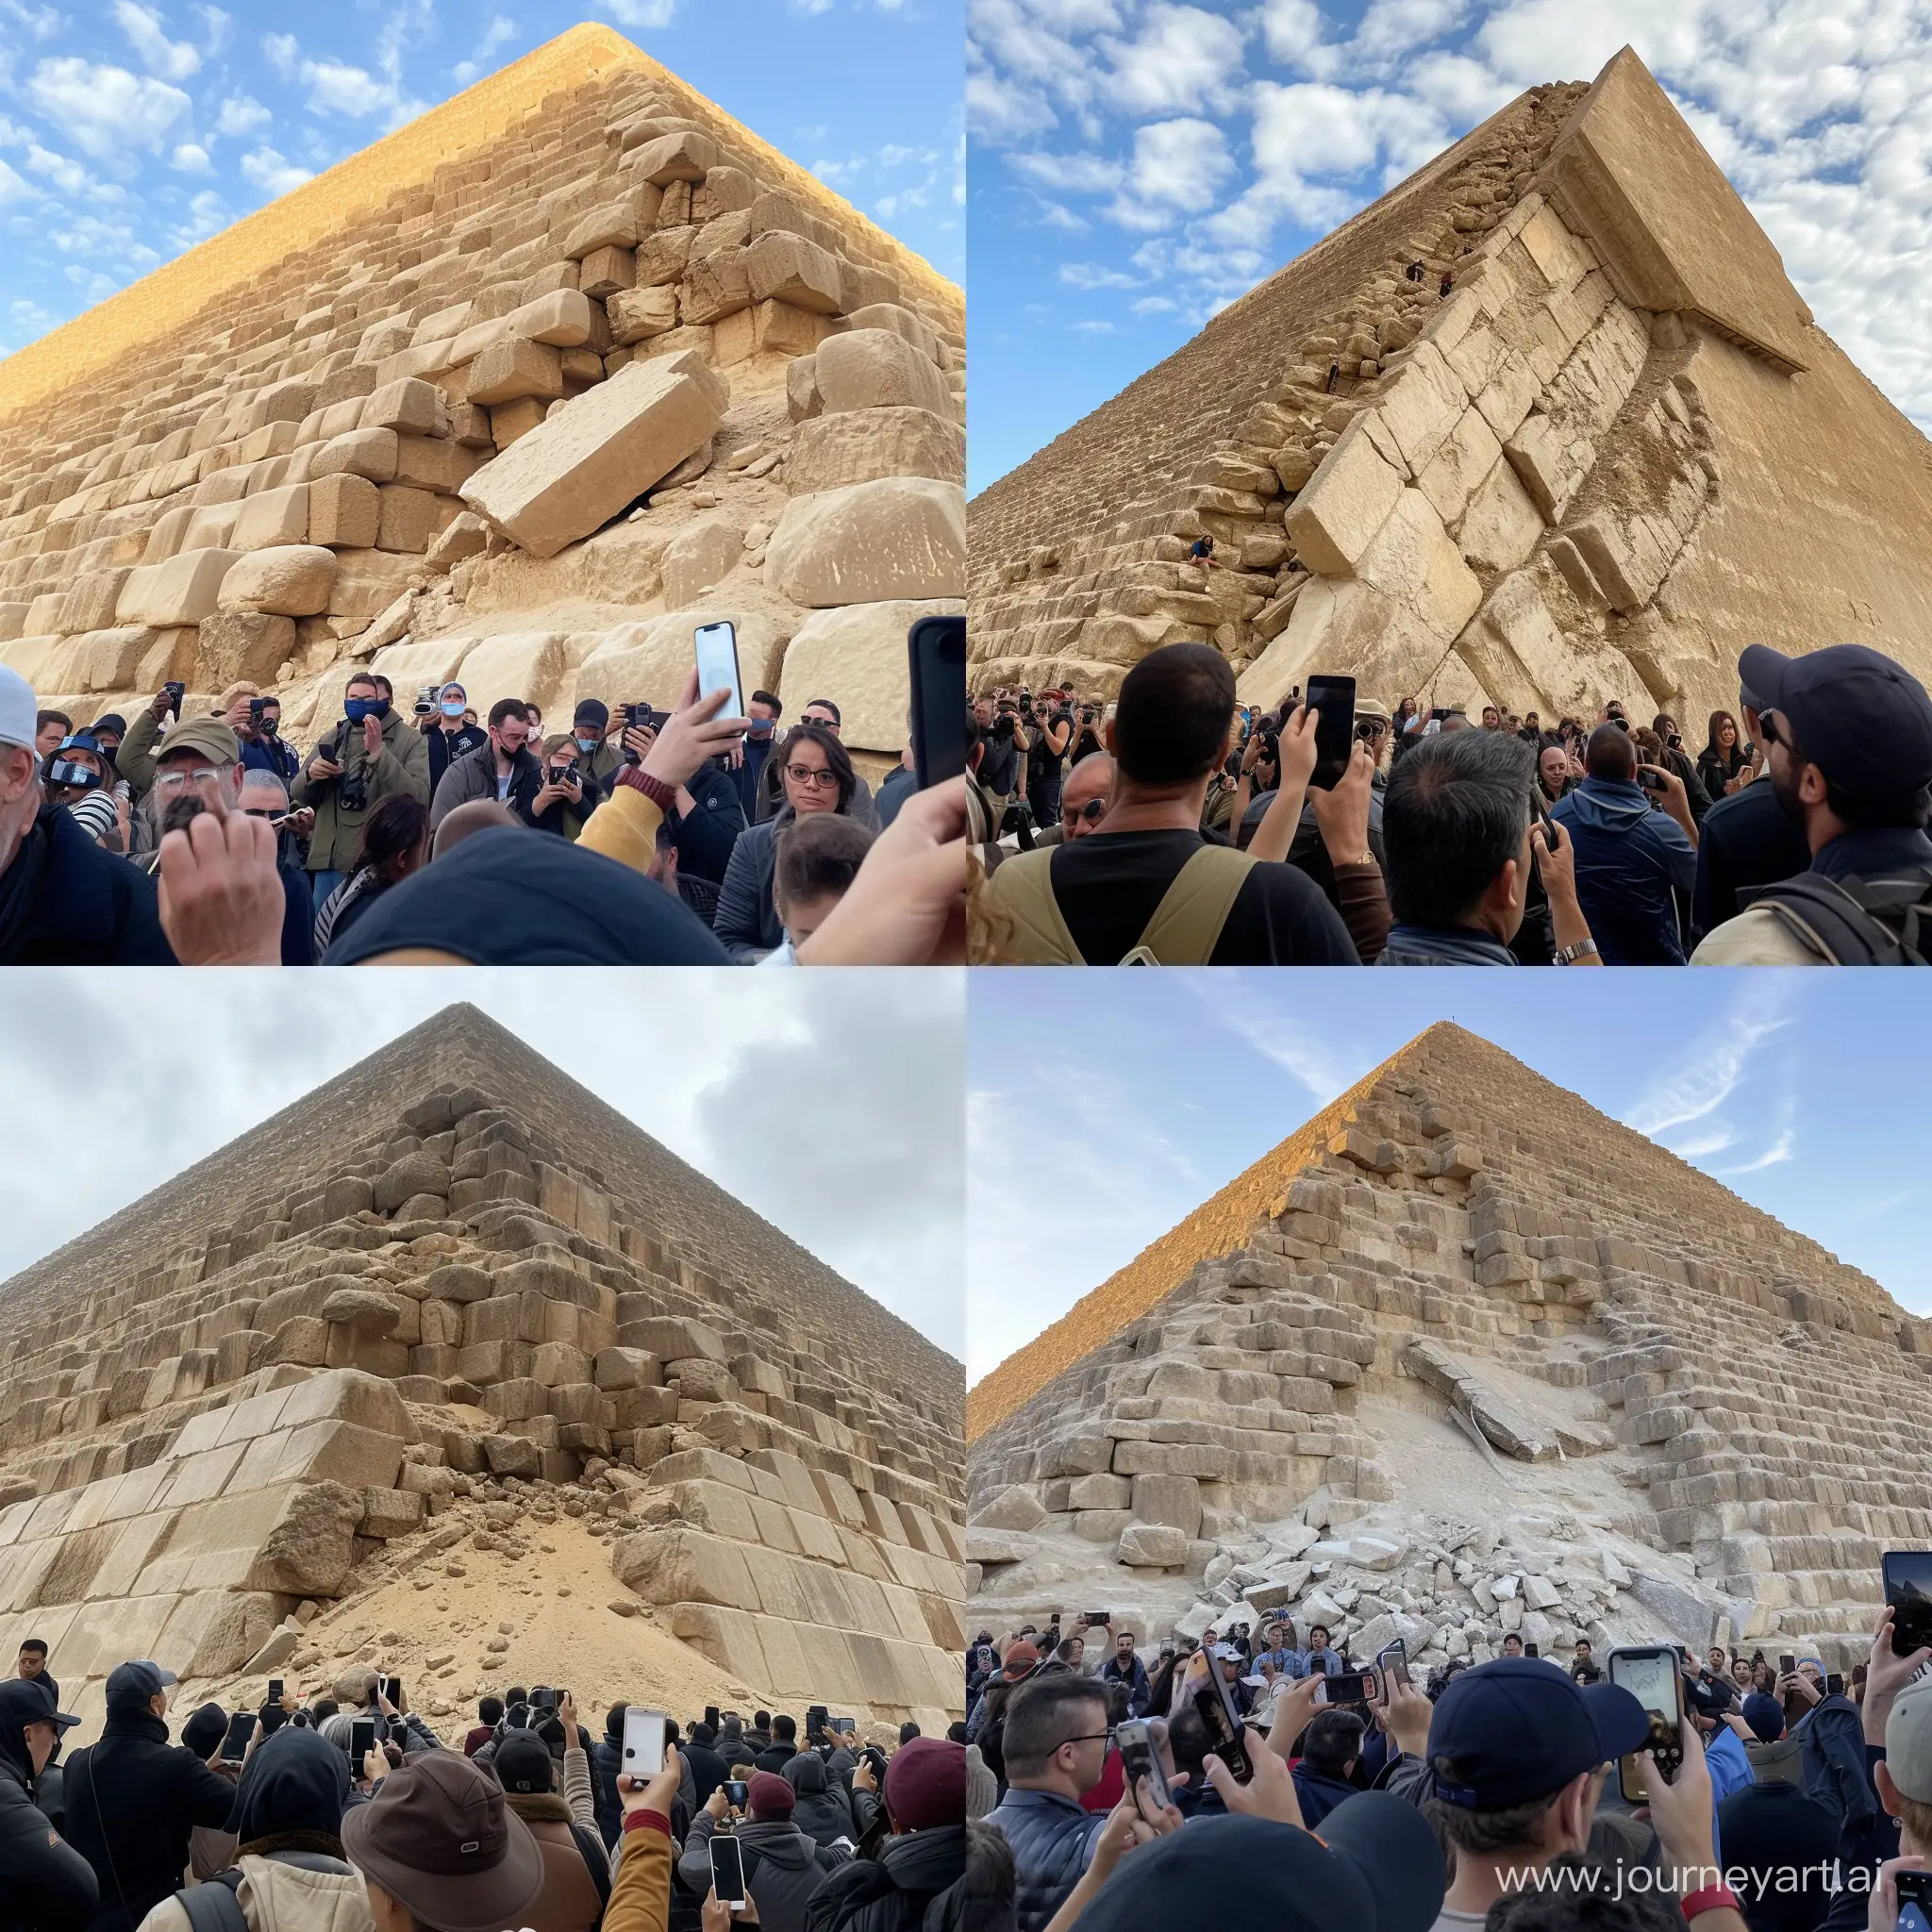 Shocking-Moment-Fallen-Pyramid-at-Cheops-Captured-by-Crowd